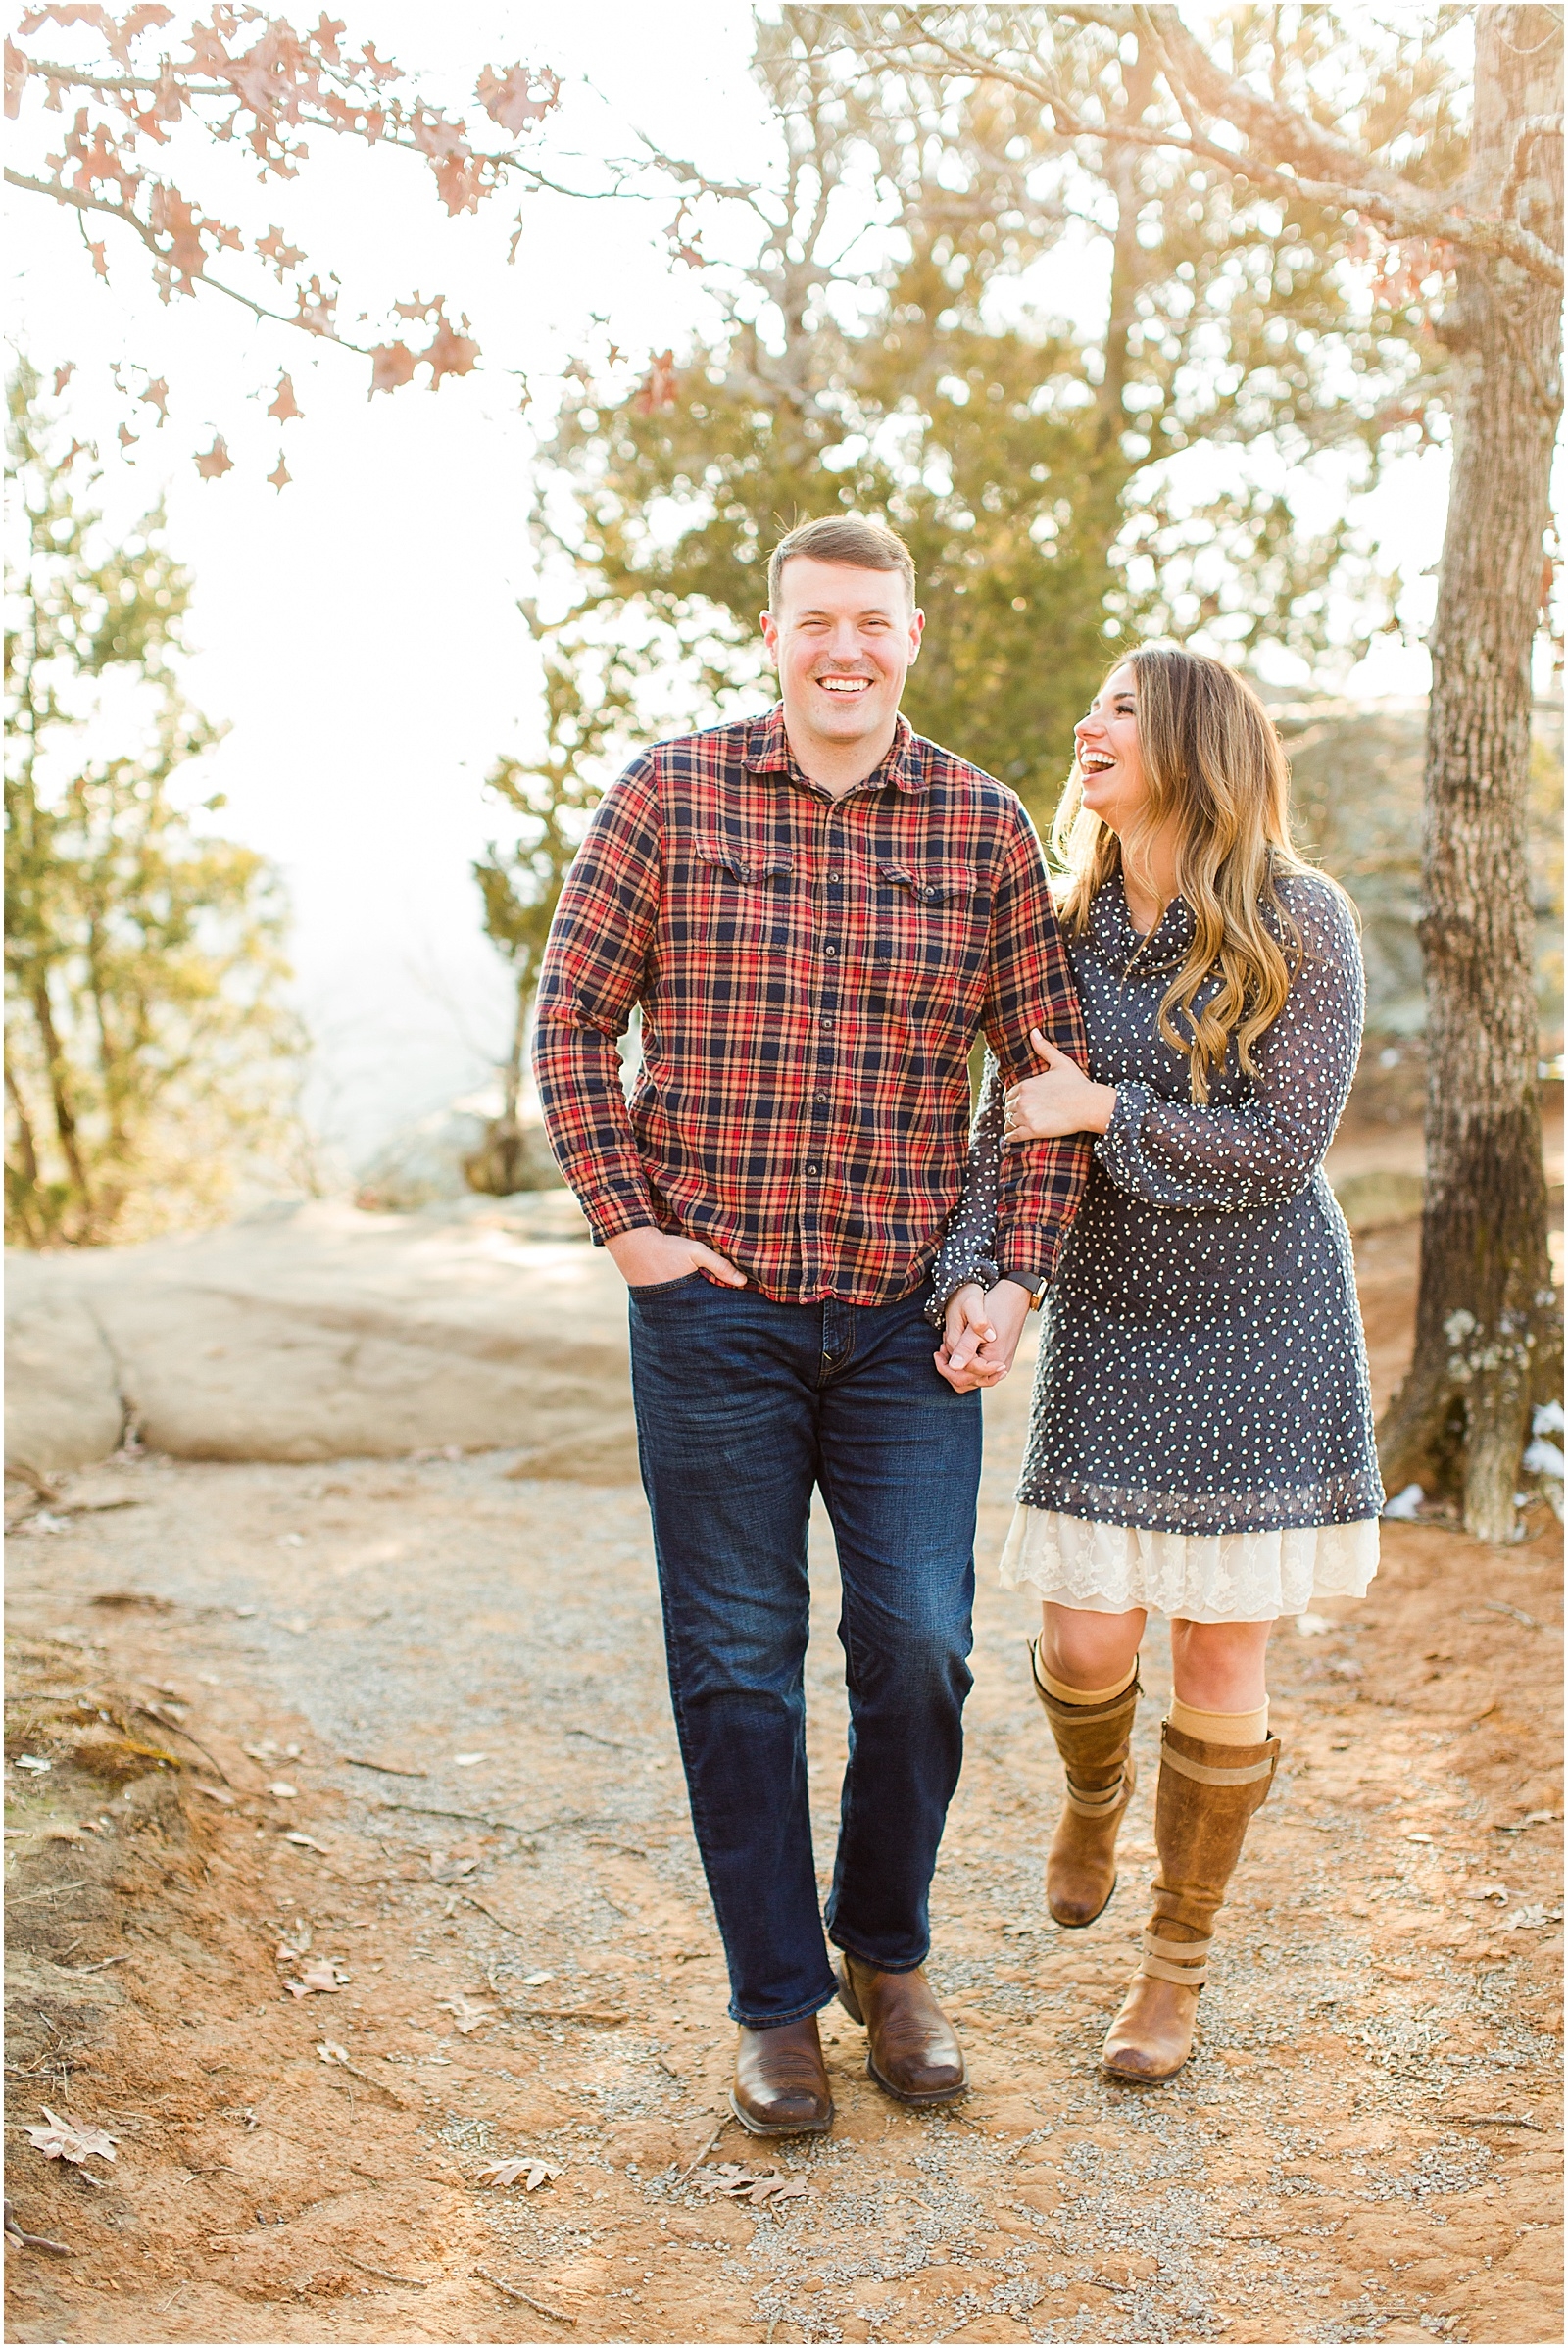 A Sunny Garden of the Gods Engagement Session | Shiloh and Lee | Bret and Brandie Photography011.jpg